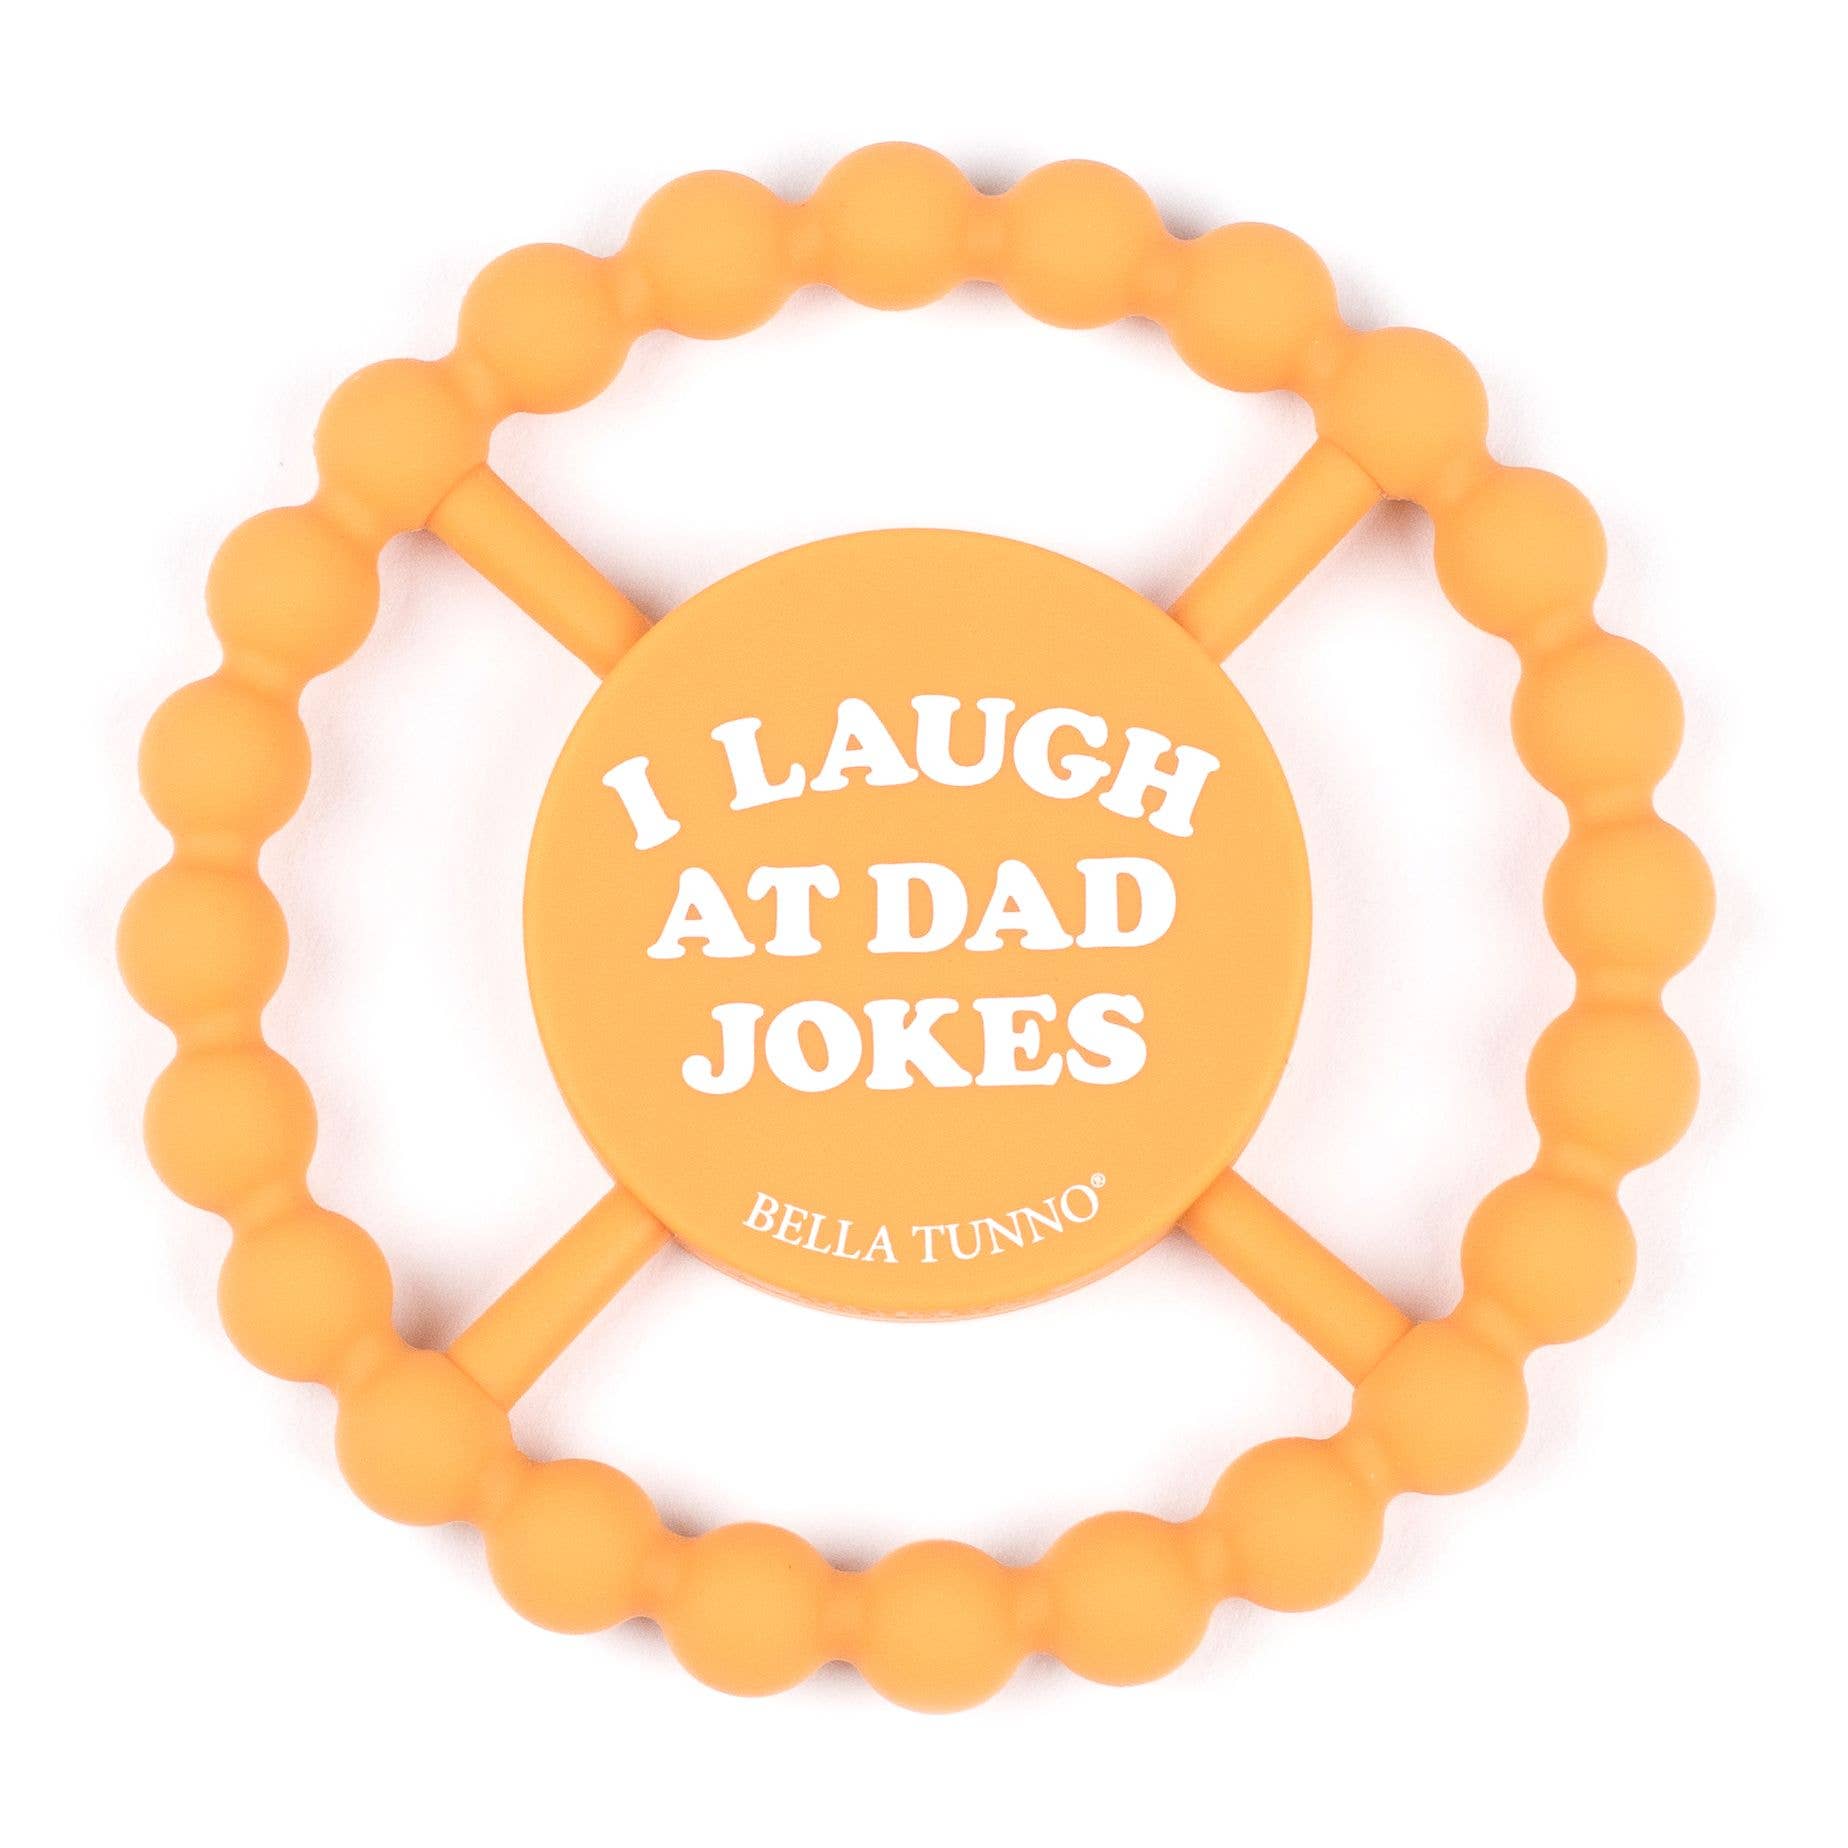 I Laugh at Dad Jokes Happy Teether - Rise and Redemption